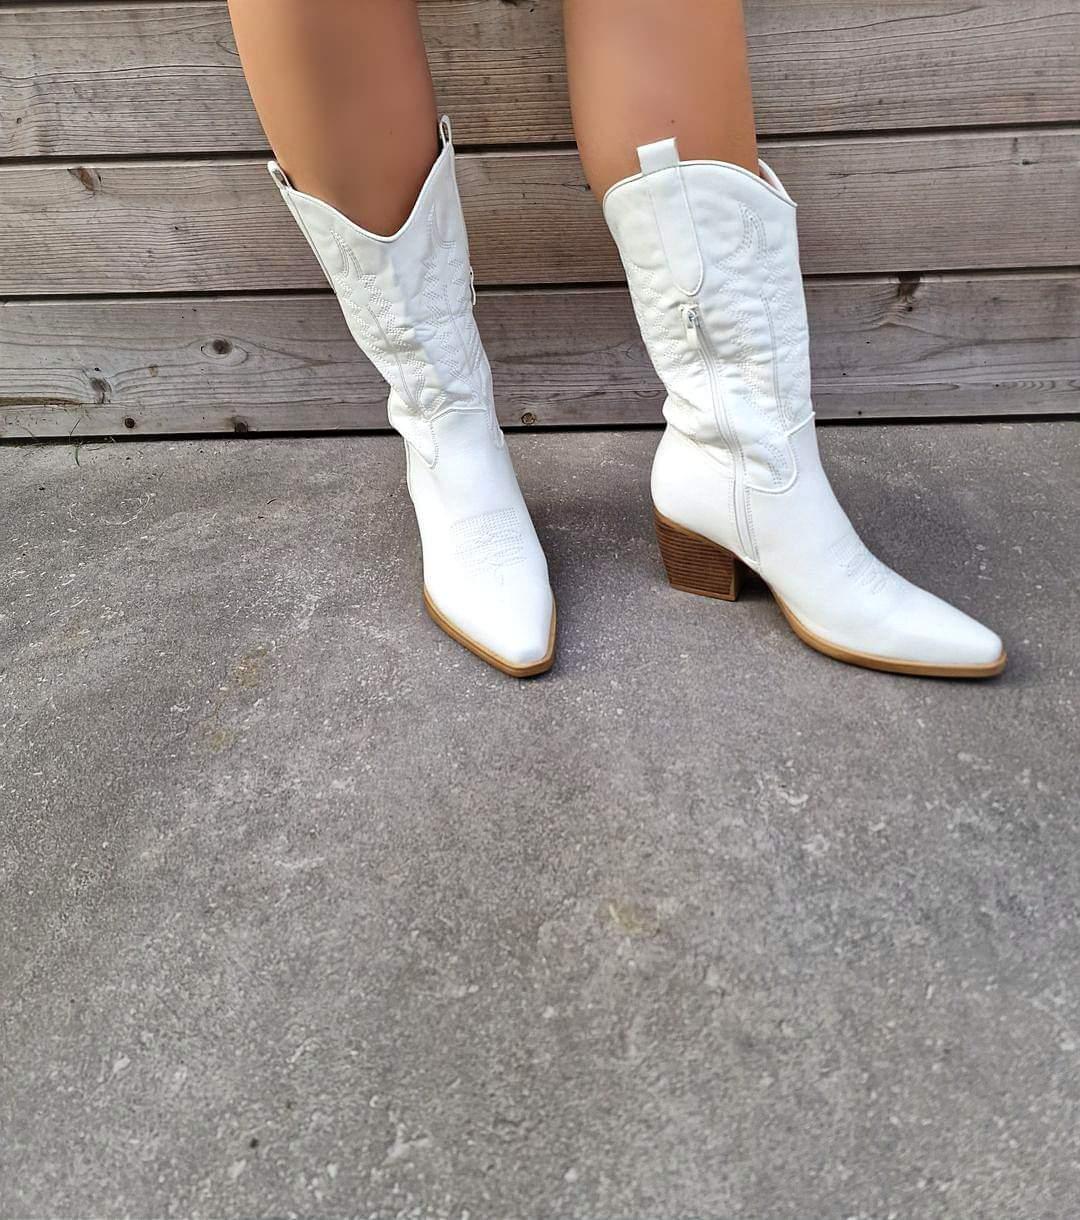 Cowboyboots Wanted - White